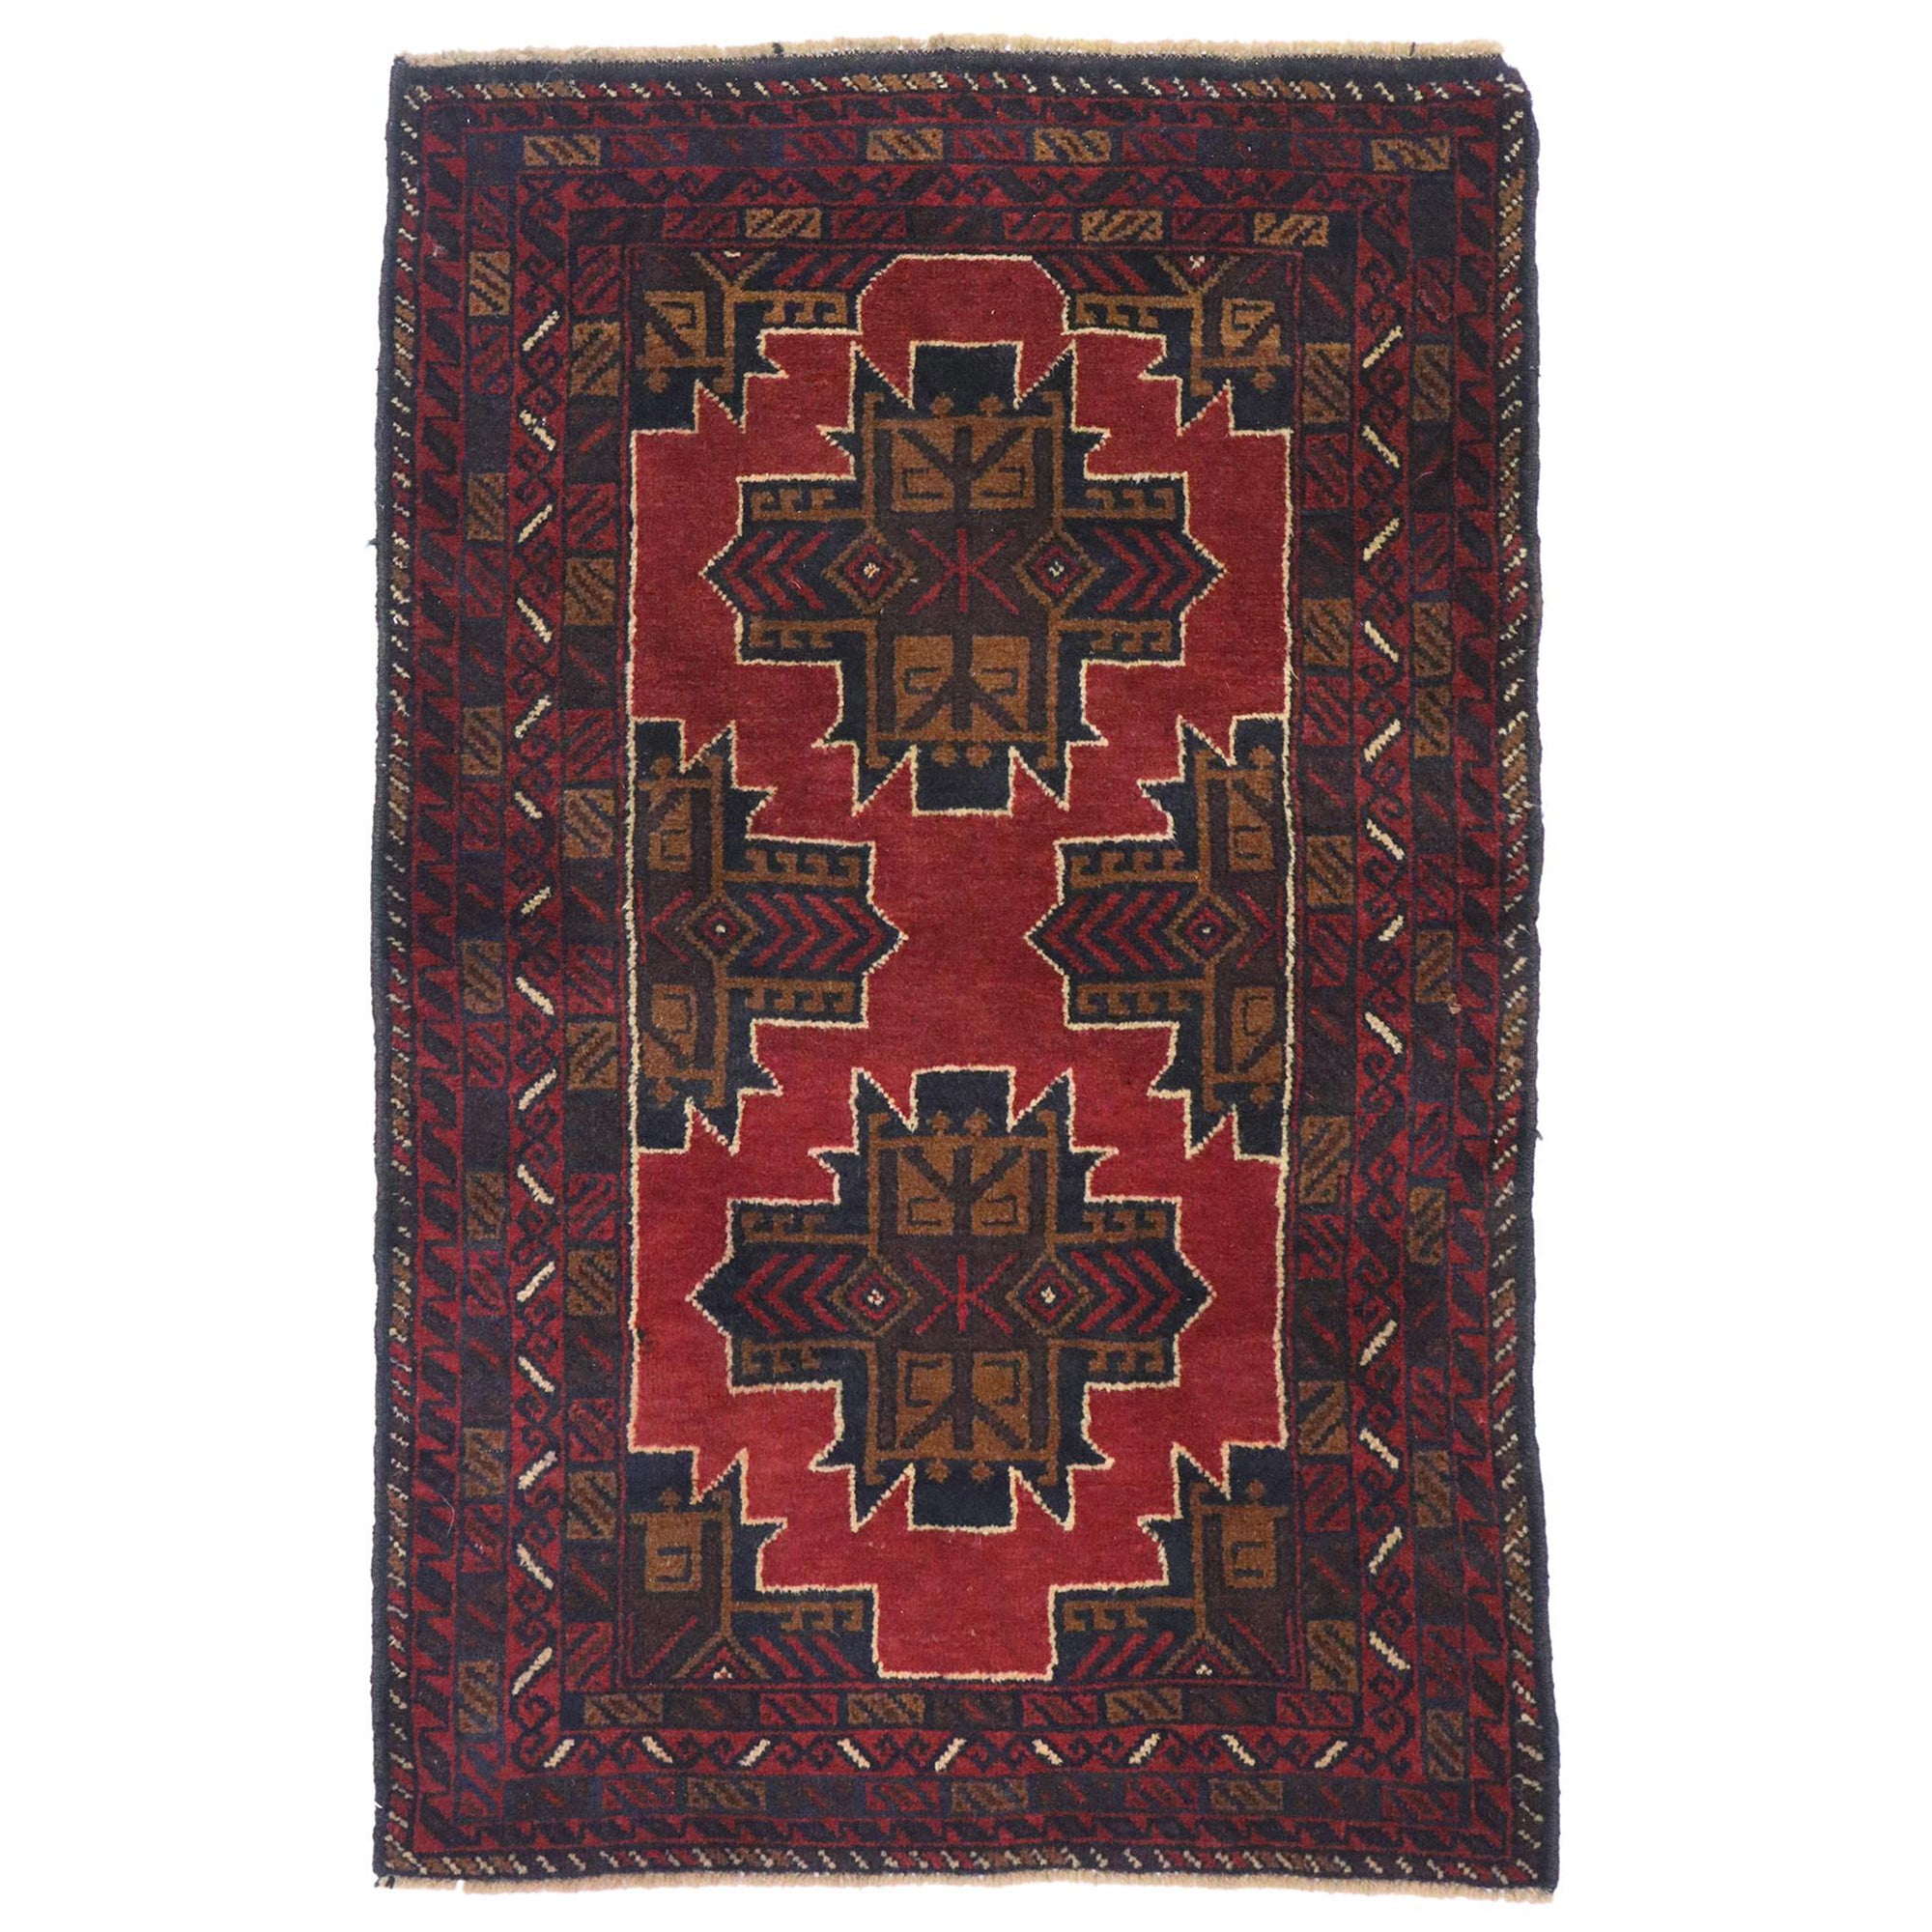 Vintage Persian Baluch Rug with Mid-Century Modern Style